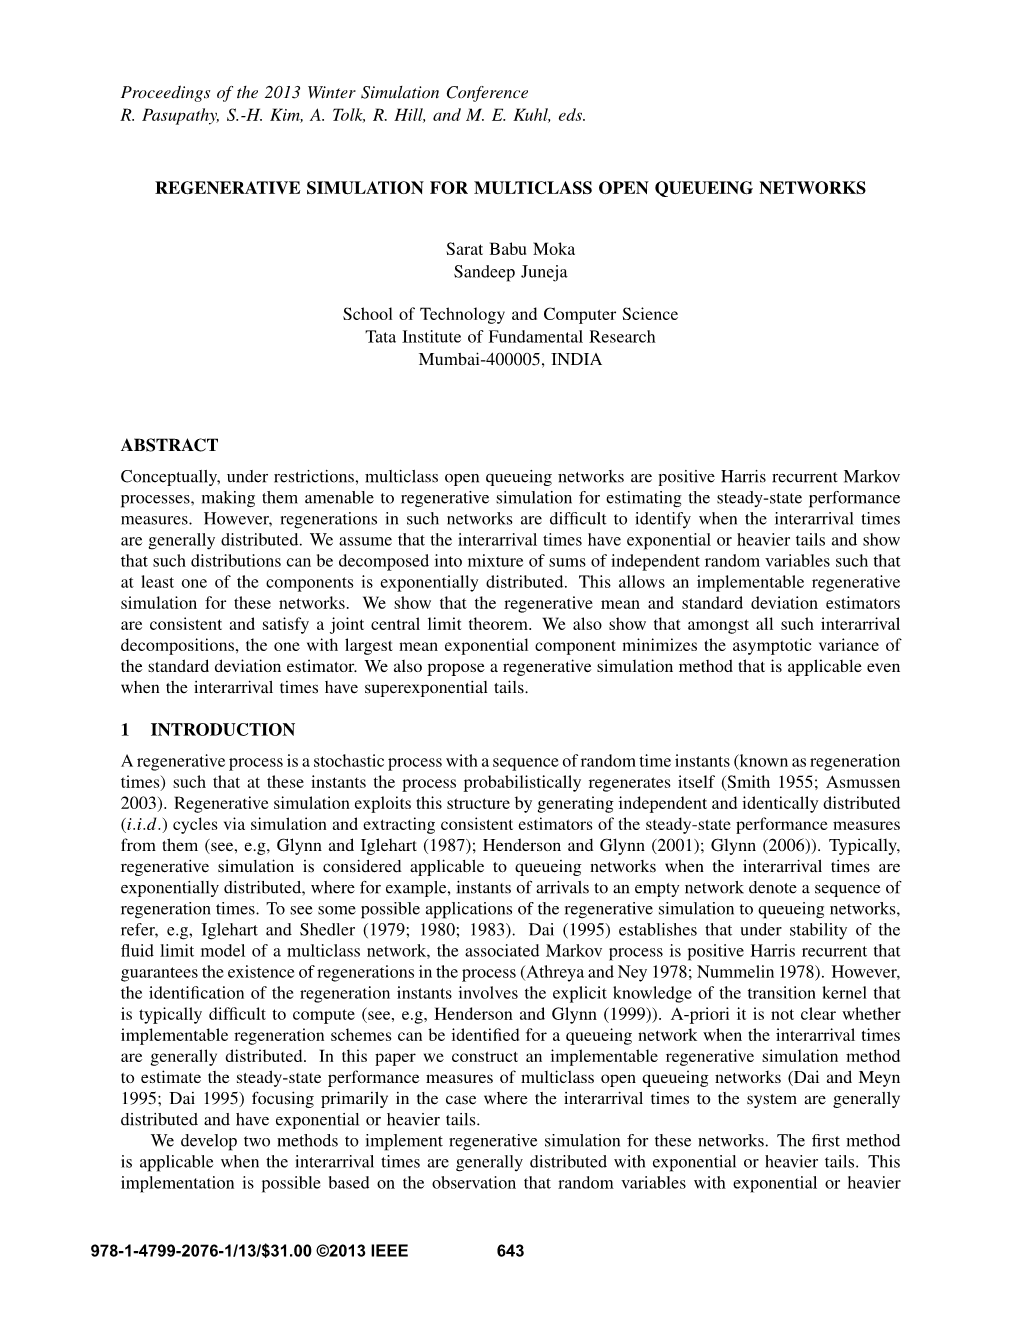 Regenerative Simulation for Multiclass Open Queueing Networks